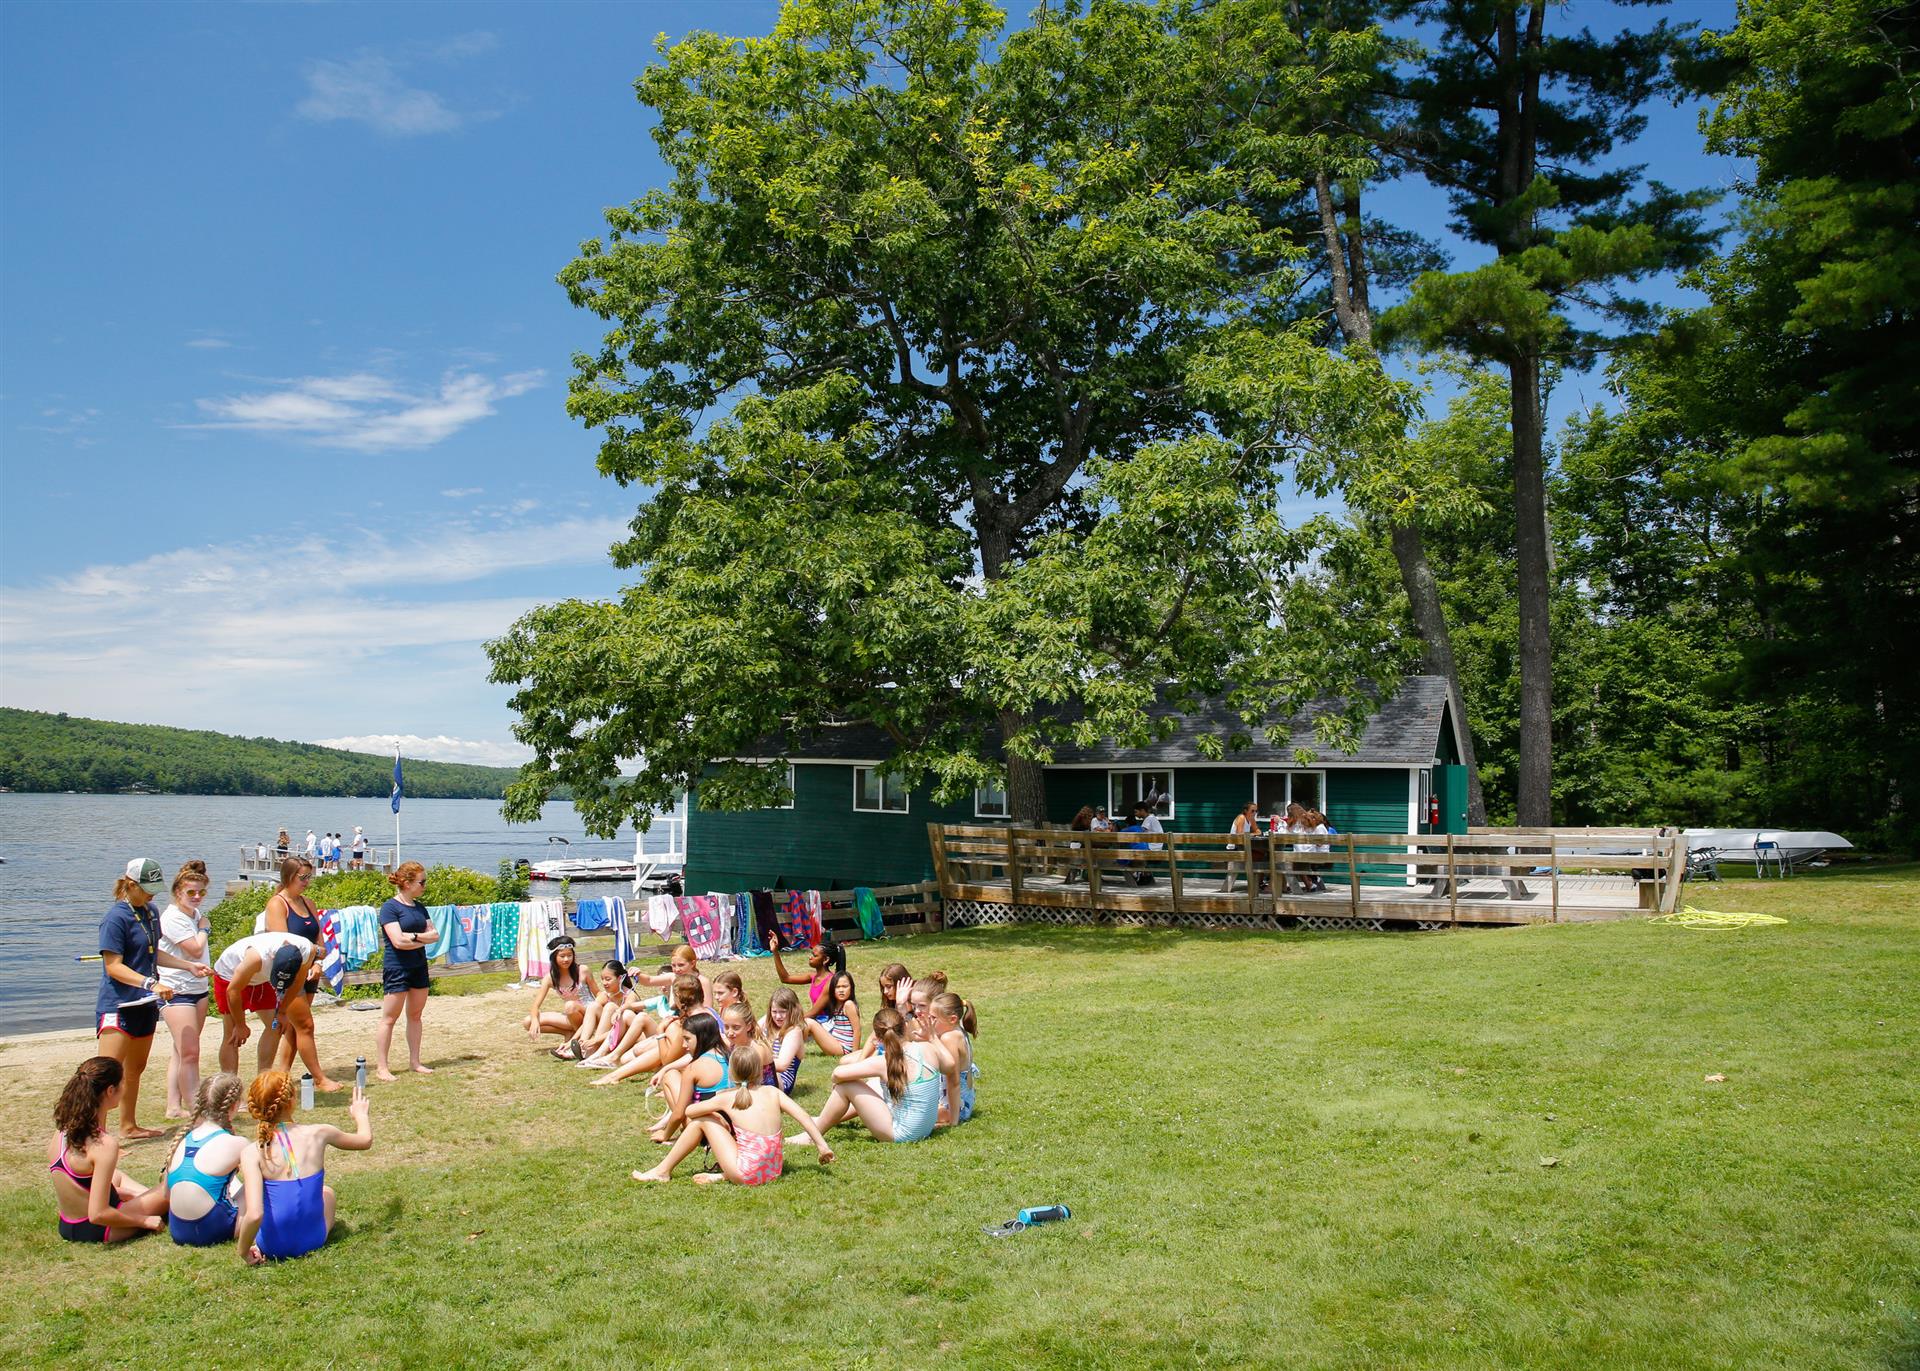 From our Camp Class of 23 8 reasons why you should work at summer camp in America